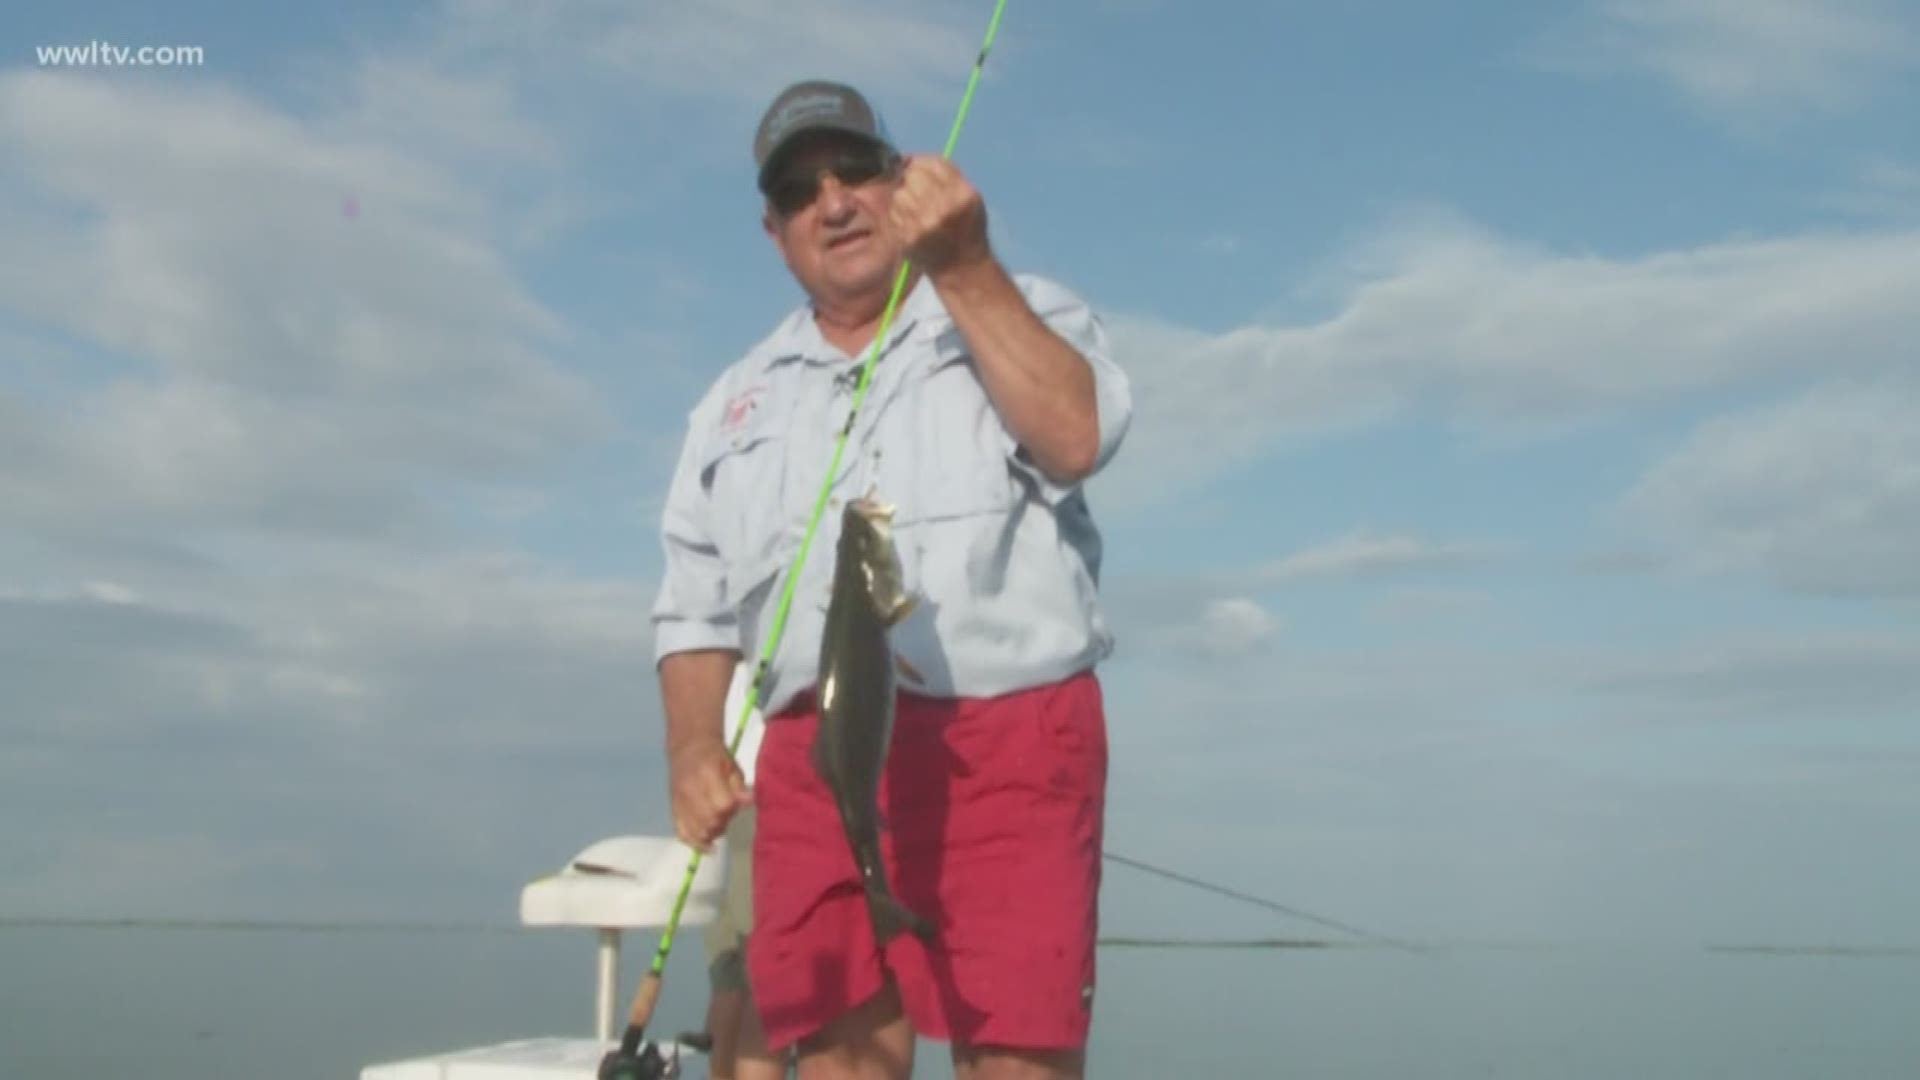 Don Dubuc has tips for finding speckled trout at Delacroix Island in this week's Fish & Game Report.